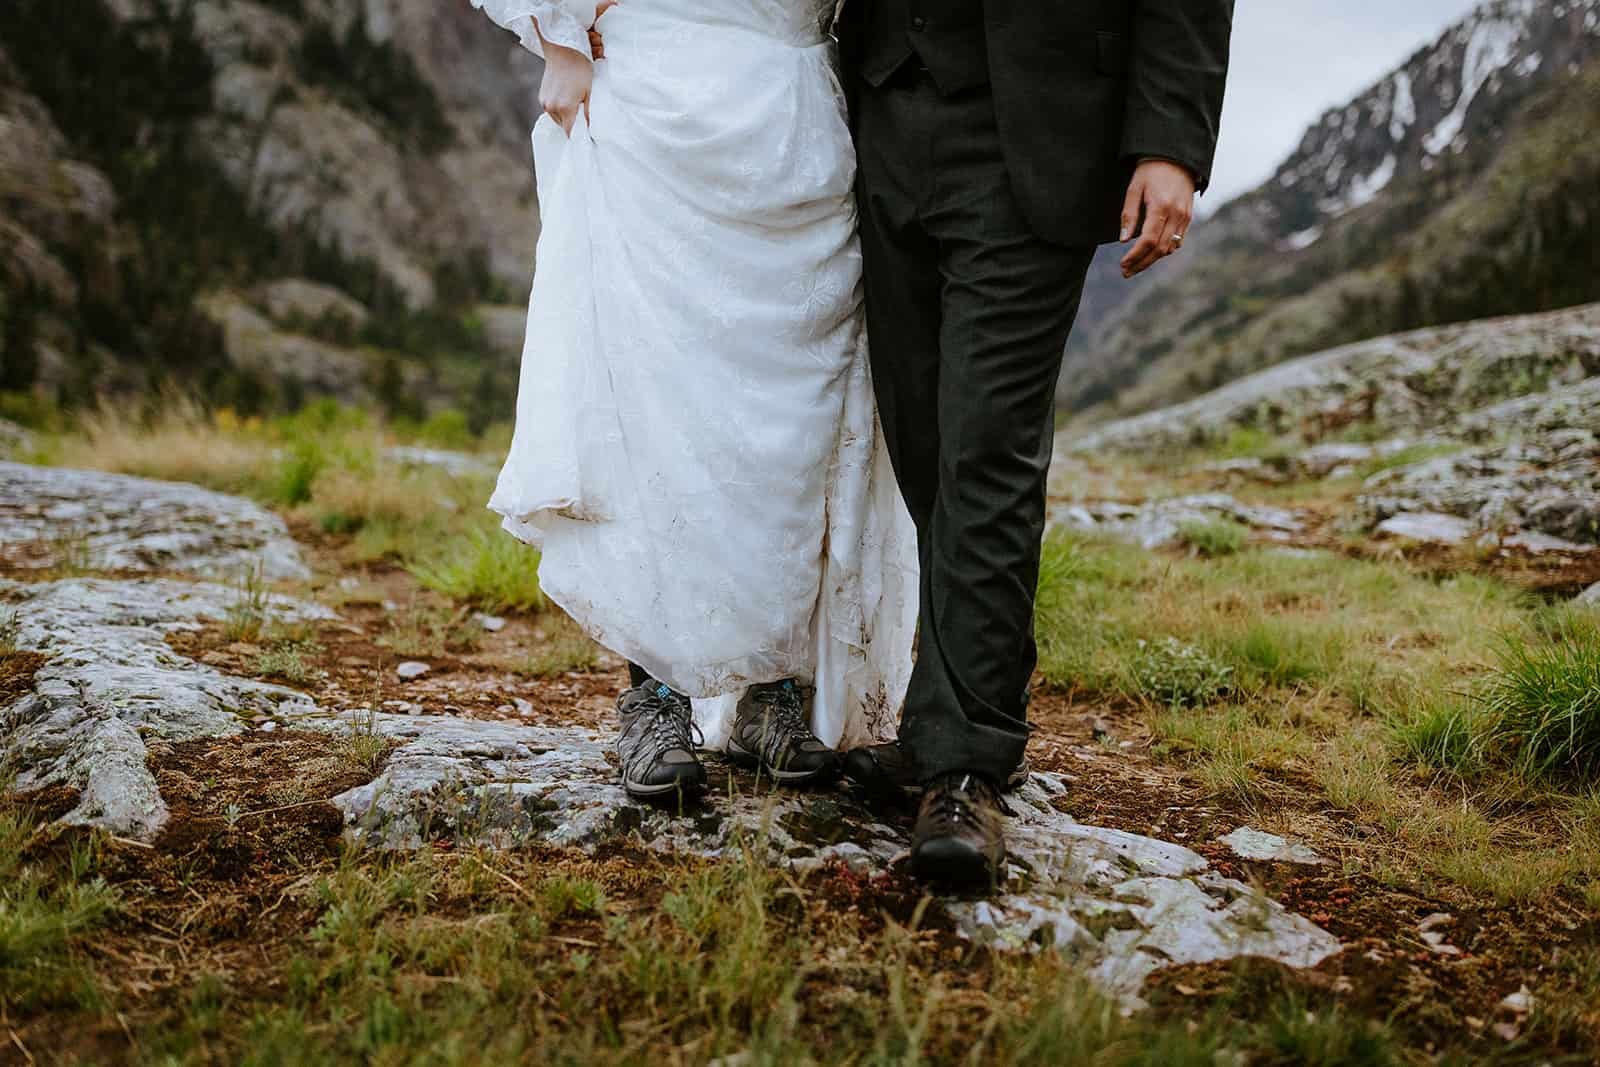 A woman in a wedding dress and man in a suit show off their Redwing boots on a rainy mountain evening